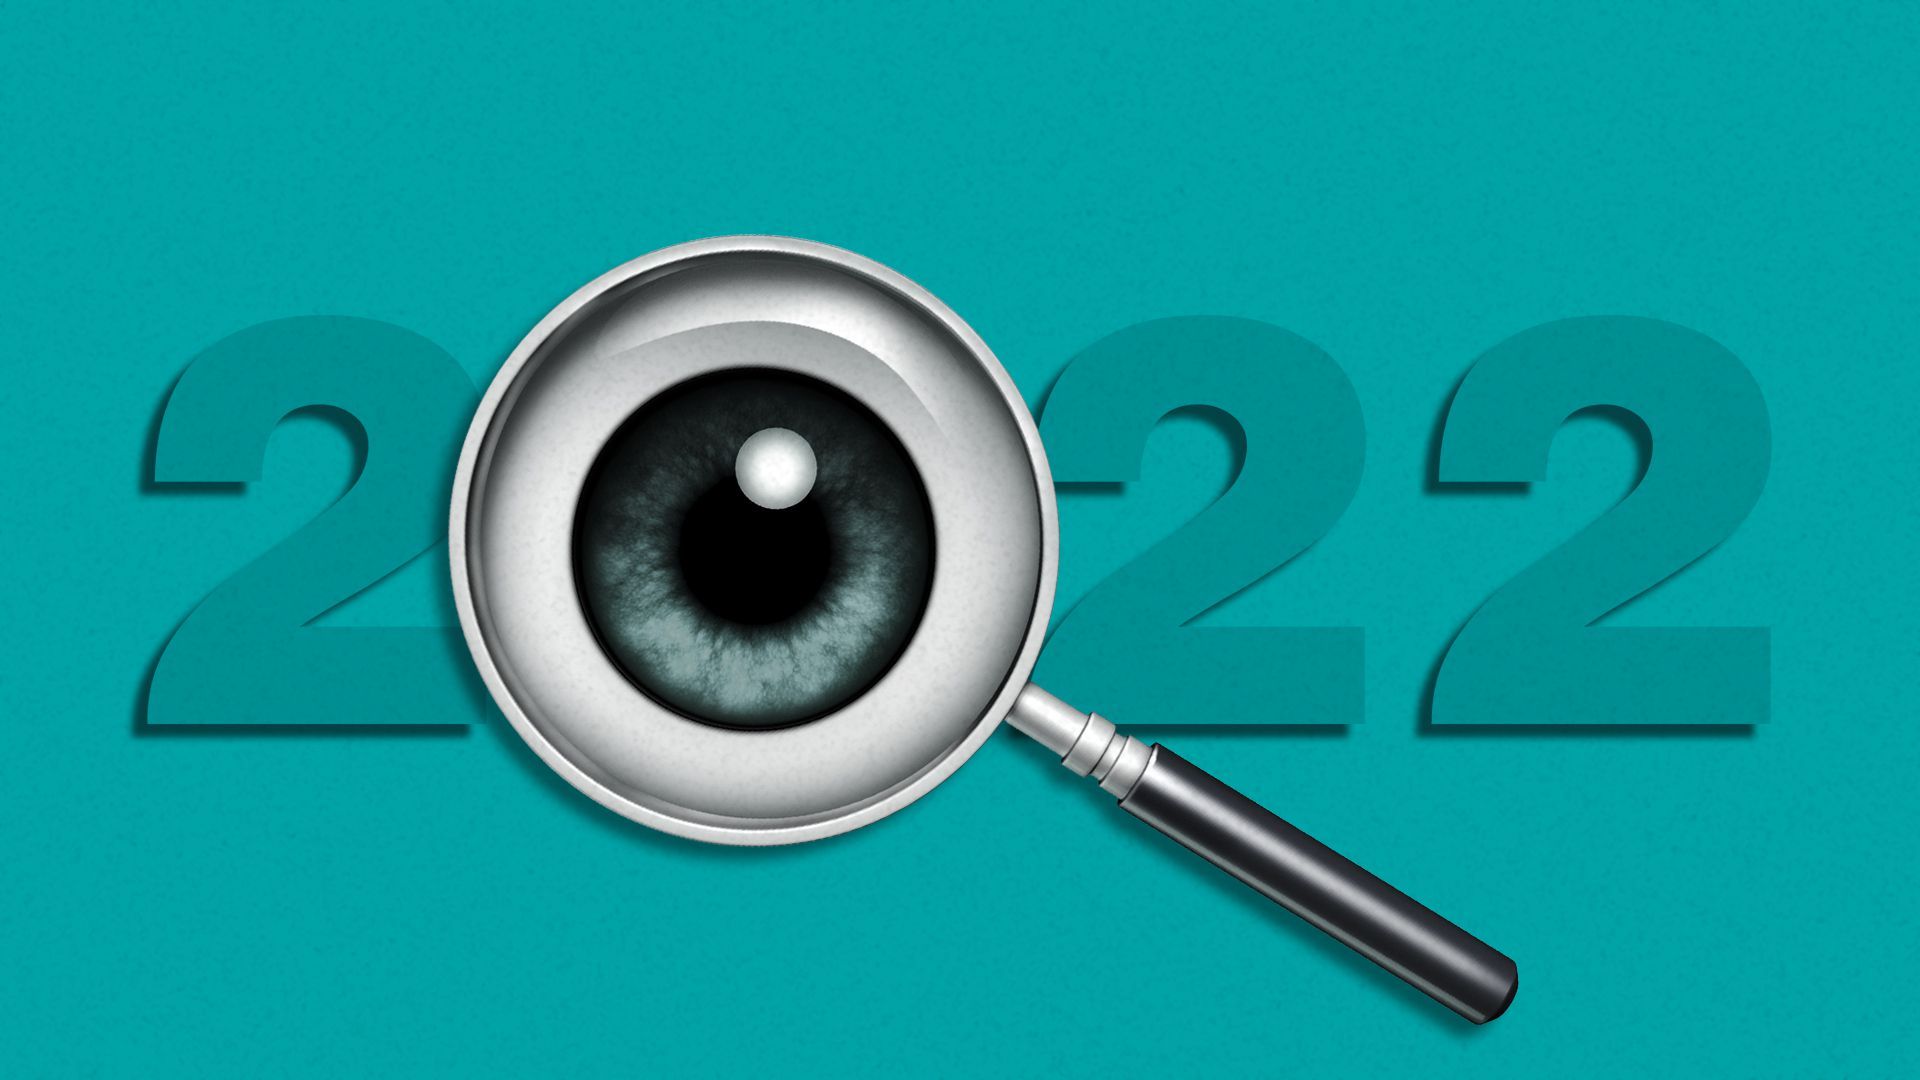 Illustration of the year 2022 with an eye in a magnifying glass in place of the zero.